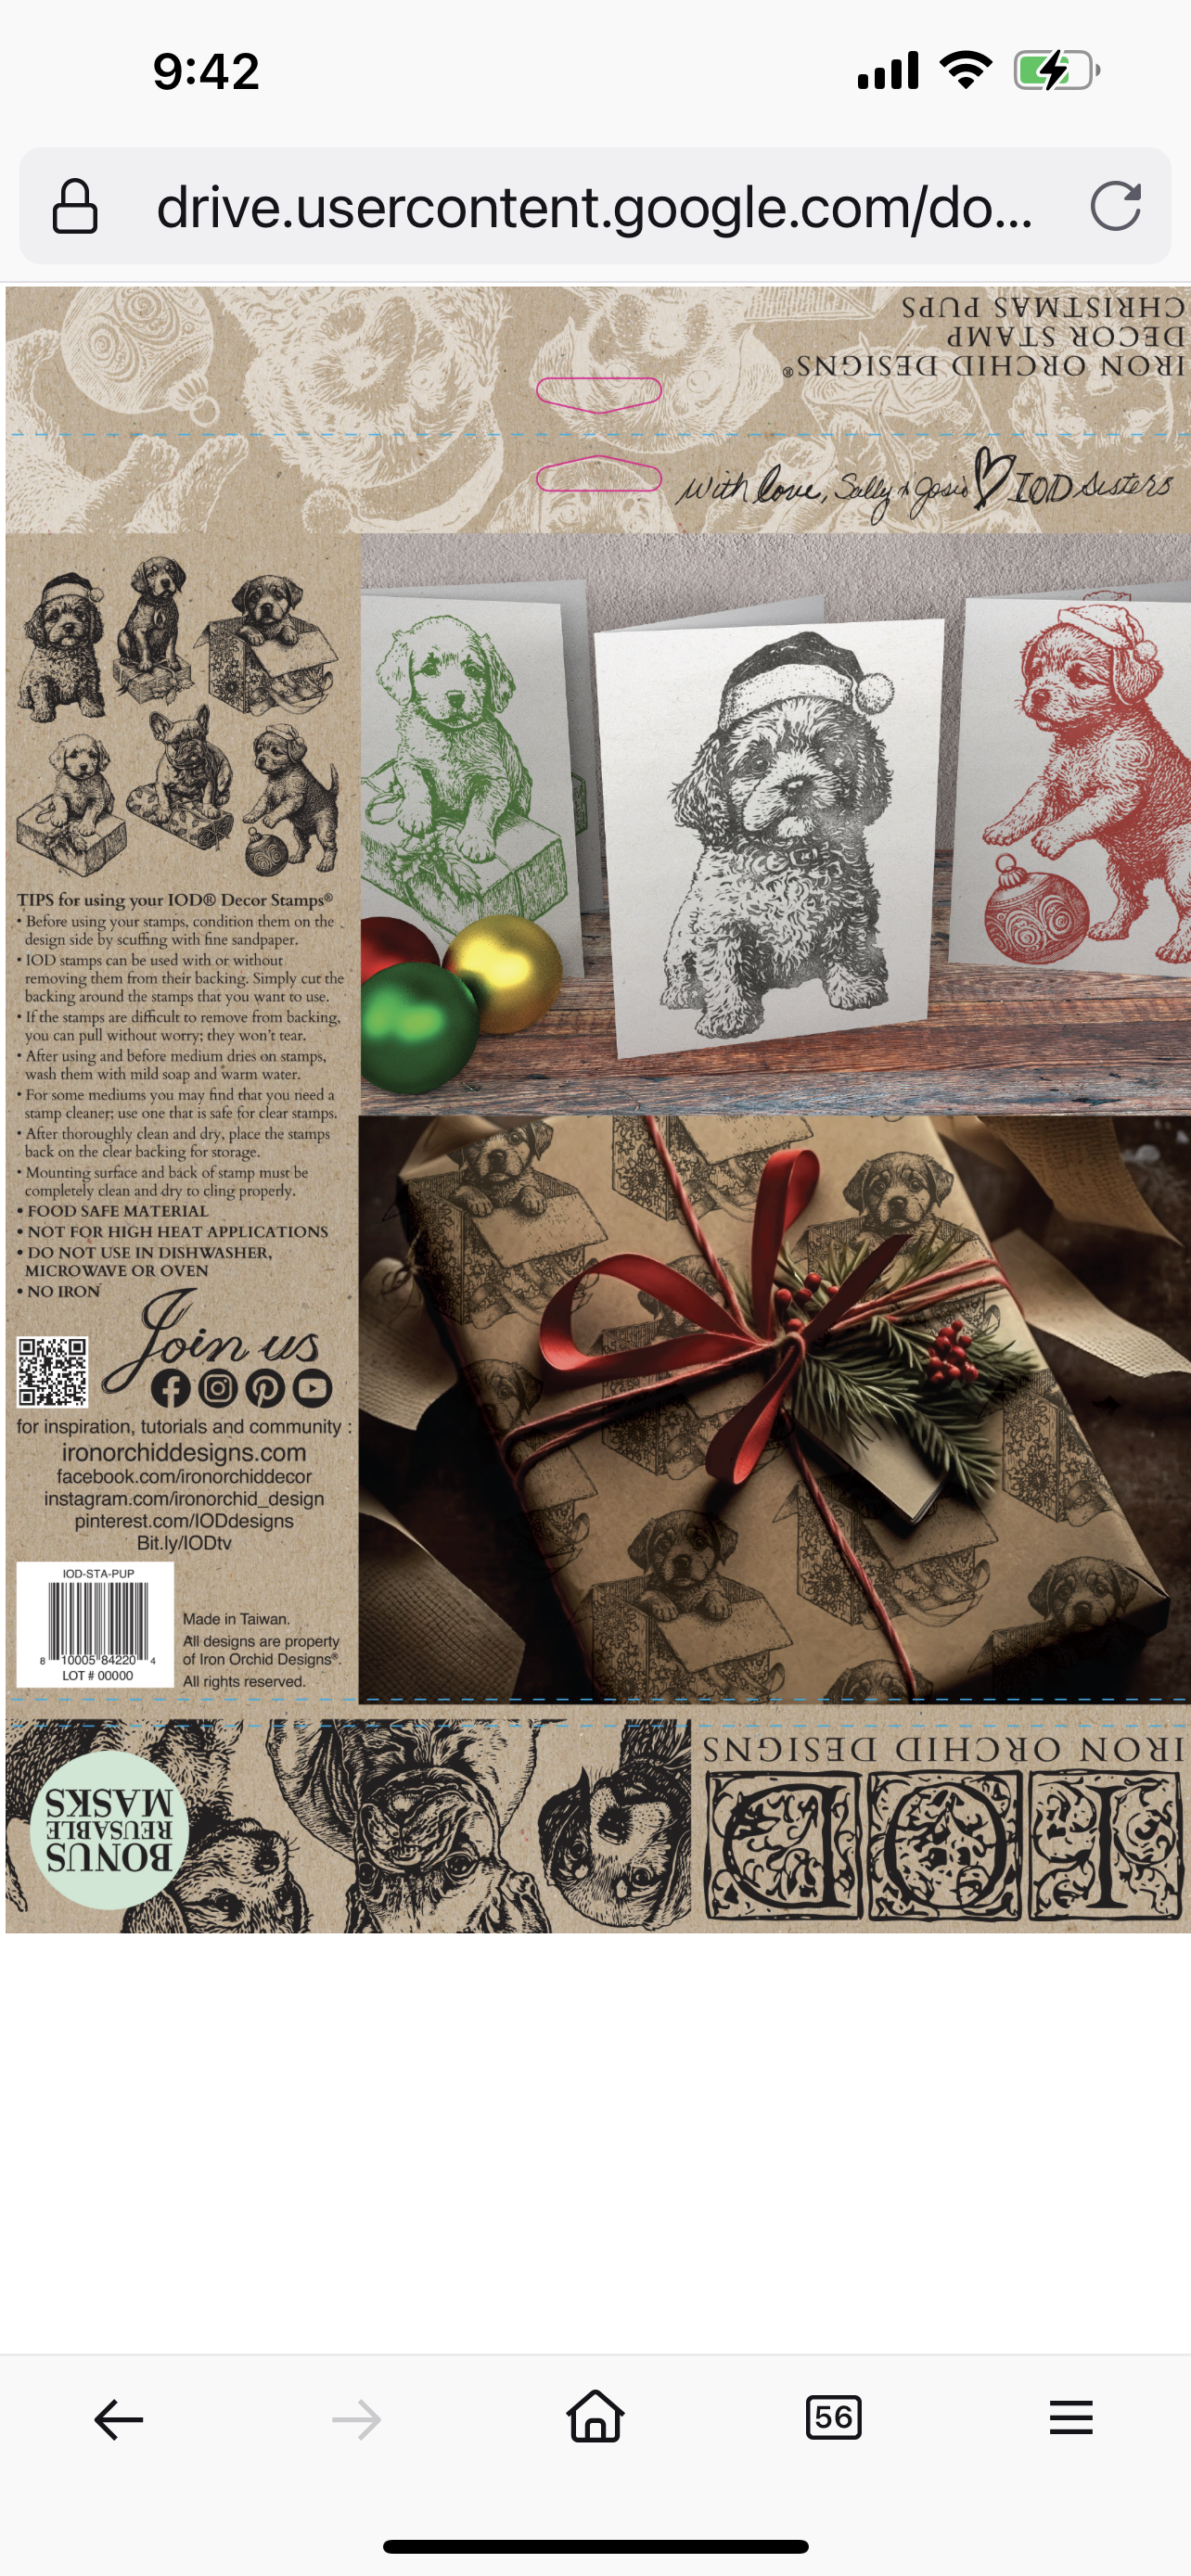 Christmas Pups Iron Orchid Designs Stamps Set Limited Edition Holiday 2023